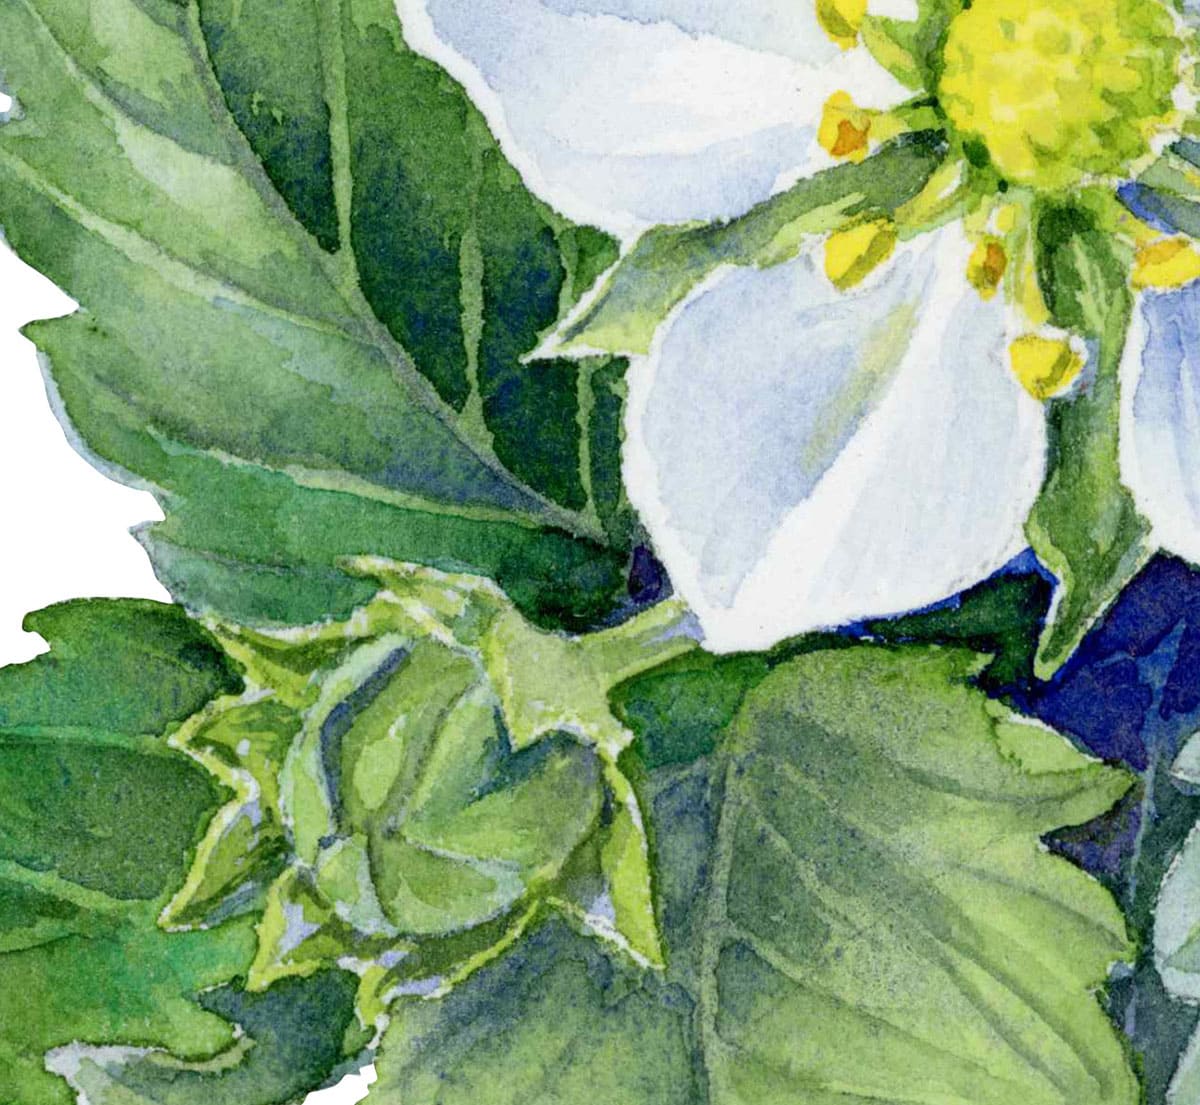 Wild strawberry flower and ladybug. Fragment of watercolor illustration